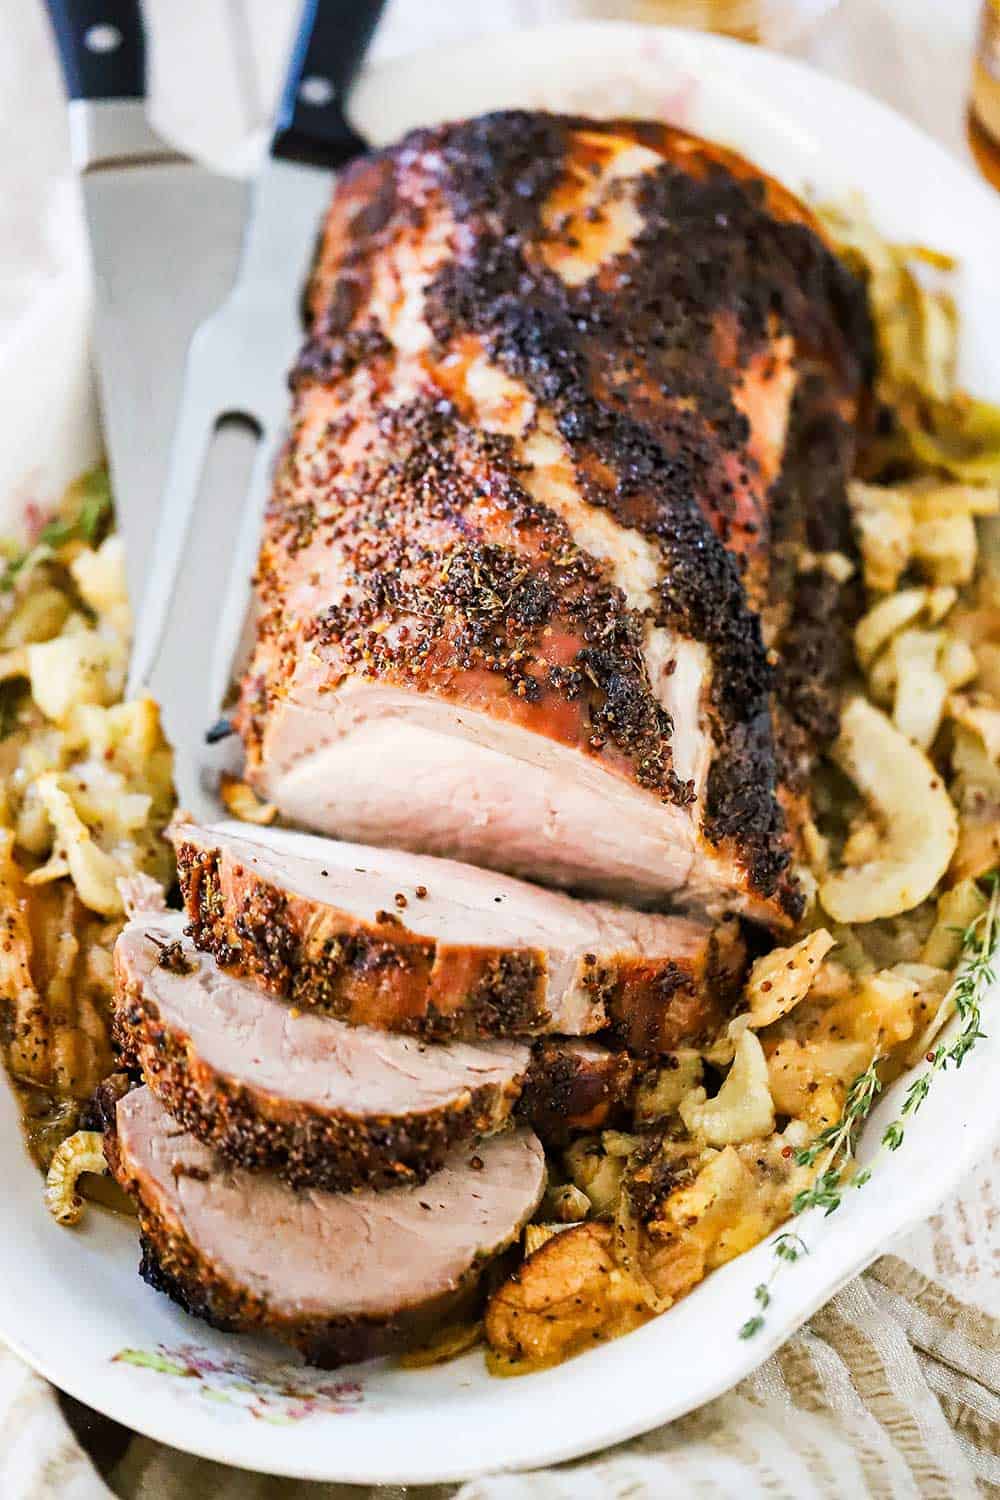 A large pork loin roast with several slices cut surrounded by roasted apples and fennel bulbs.